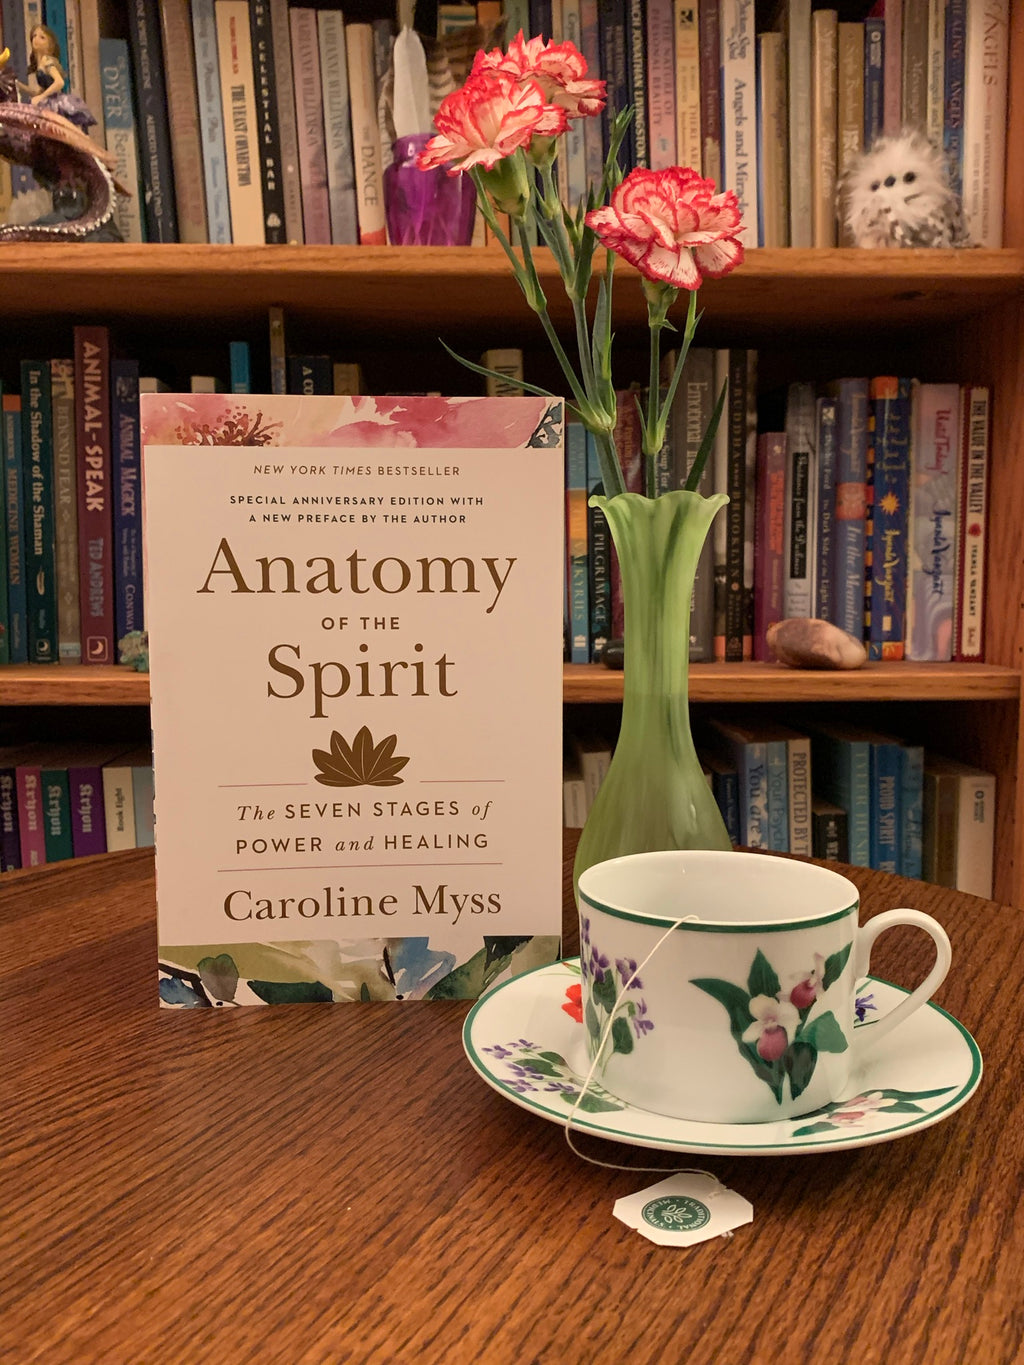 Anatomy of the Spirit by Caroline Myss is a book about healing through the understanding that it is emotional/psychological stresses and unhealthy attitudes and behaviors that create problems and dis-ease in our bodies - that these stresses correspond to certain parts of the body that then become imbalanced and unhealthy. $17.99